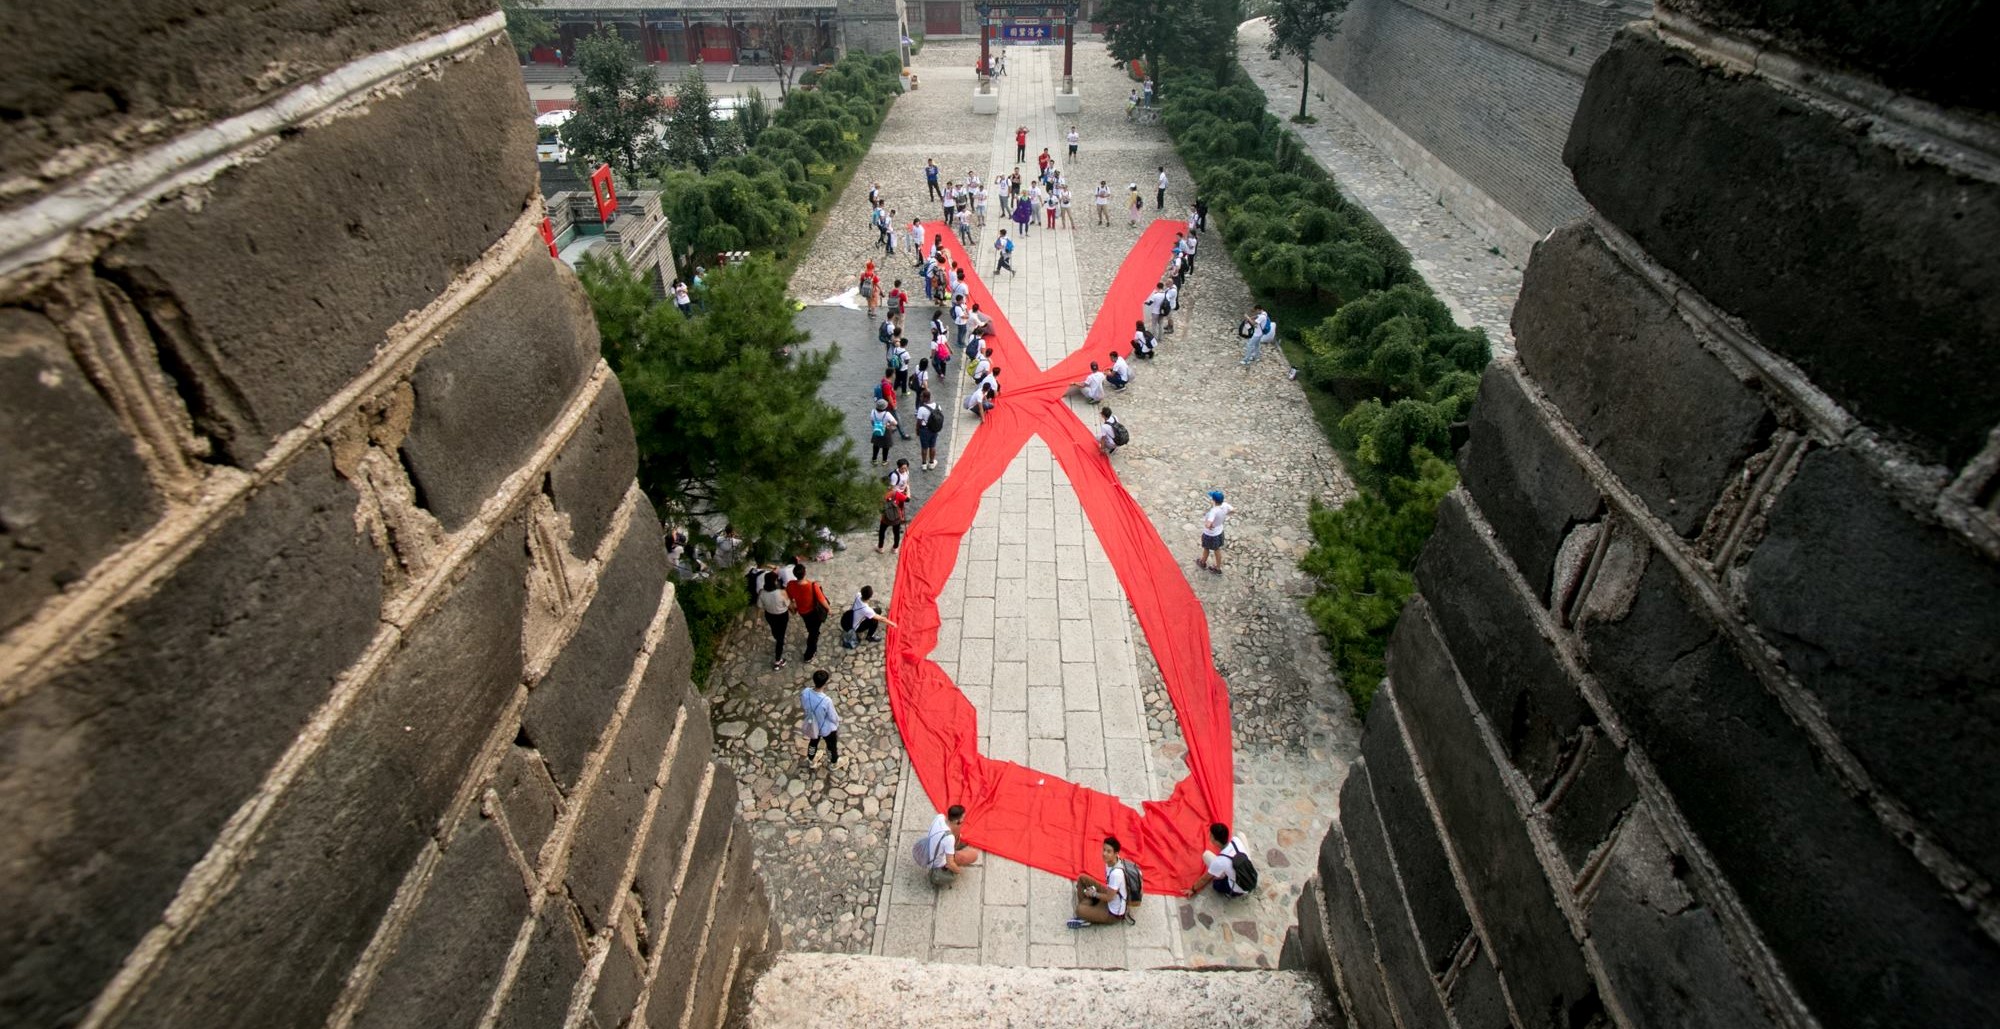 R Sign-ups Now Open for the China AIDS Walk at the Great Wall